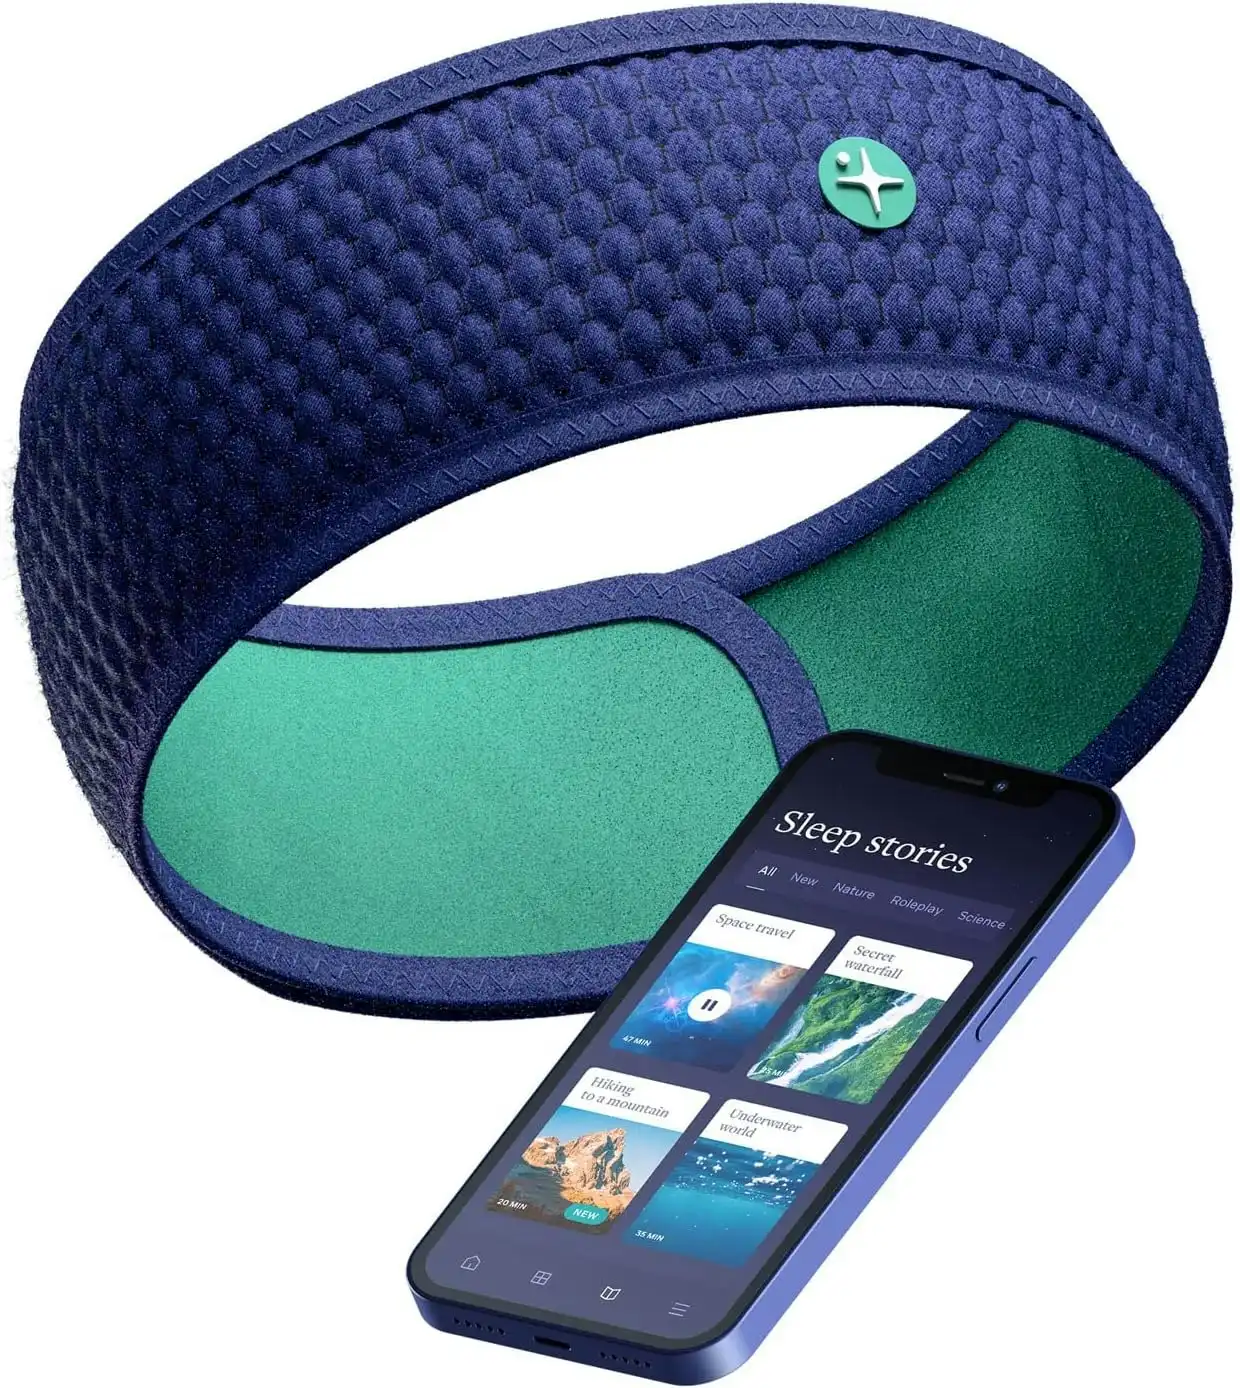 HoomBand Wireless | Bluetooth Innovative Headband for Sleep, Travel, Meditation | Charging Cable Included & Free Access to Hypnotic Stories Created by